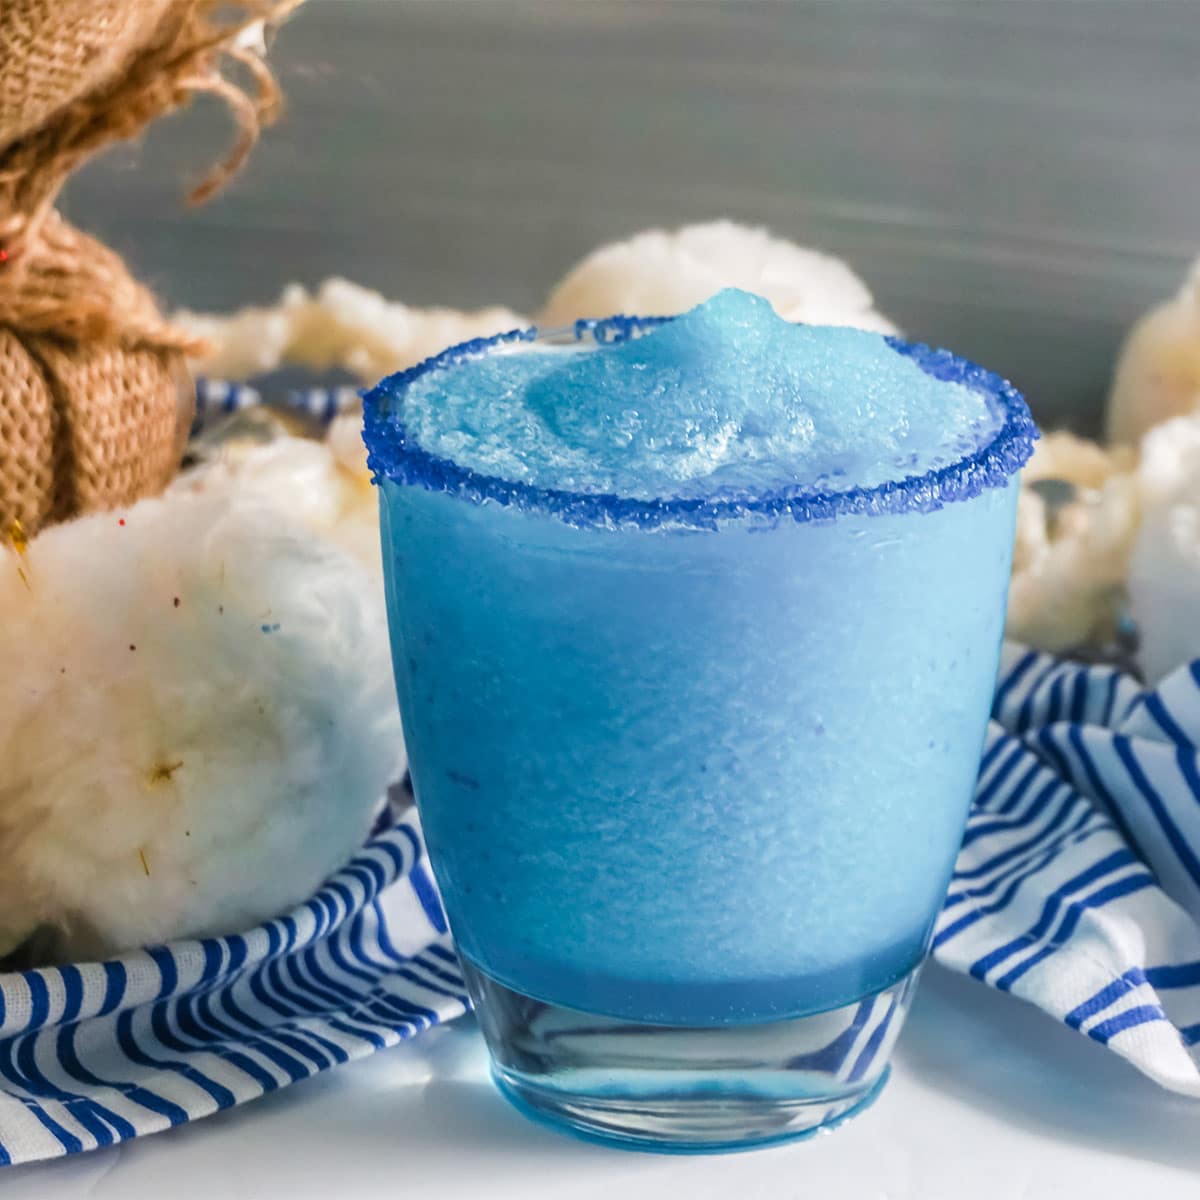 White fluffy cotton behind Snowball Punch with blue sugared rim.